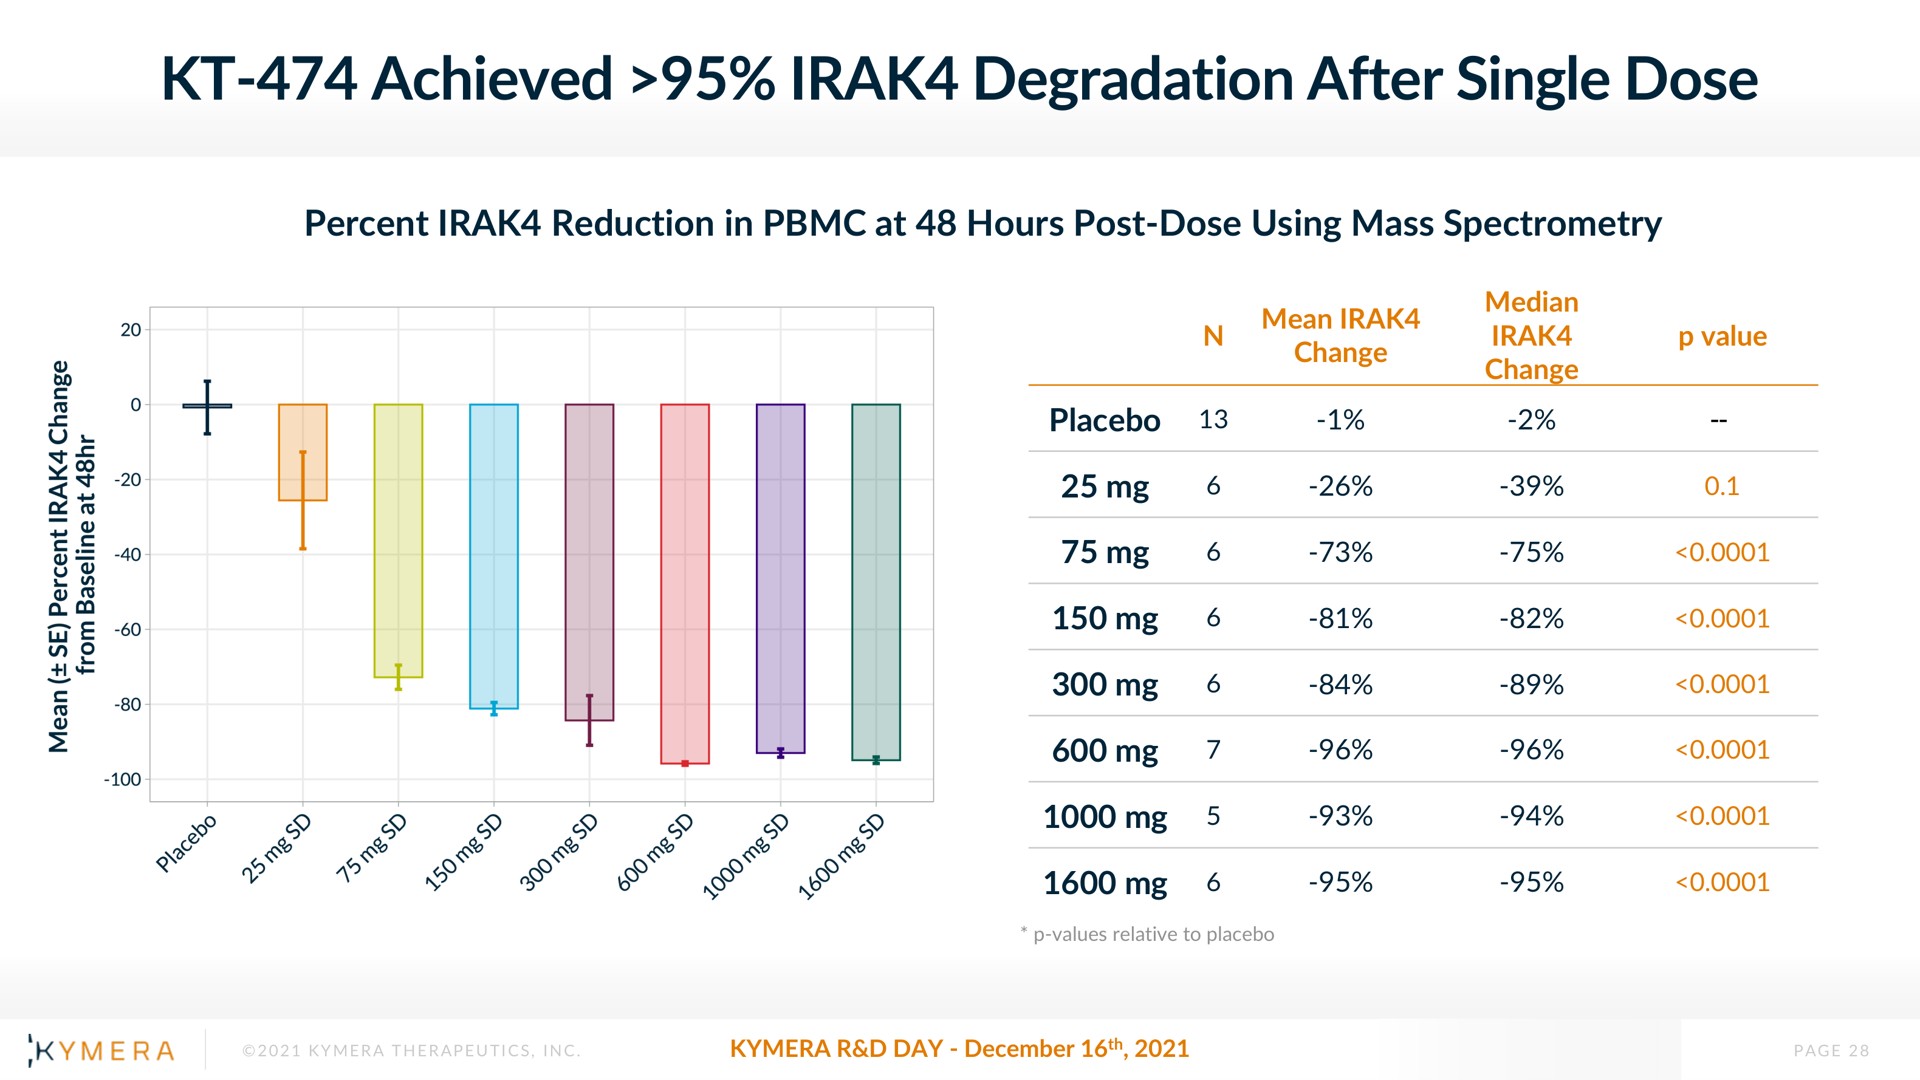 achieved degradation after single dose | Kymera